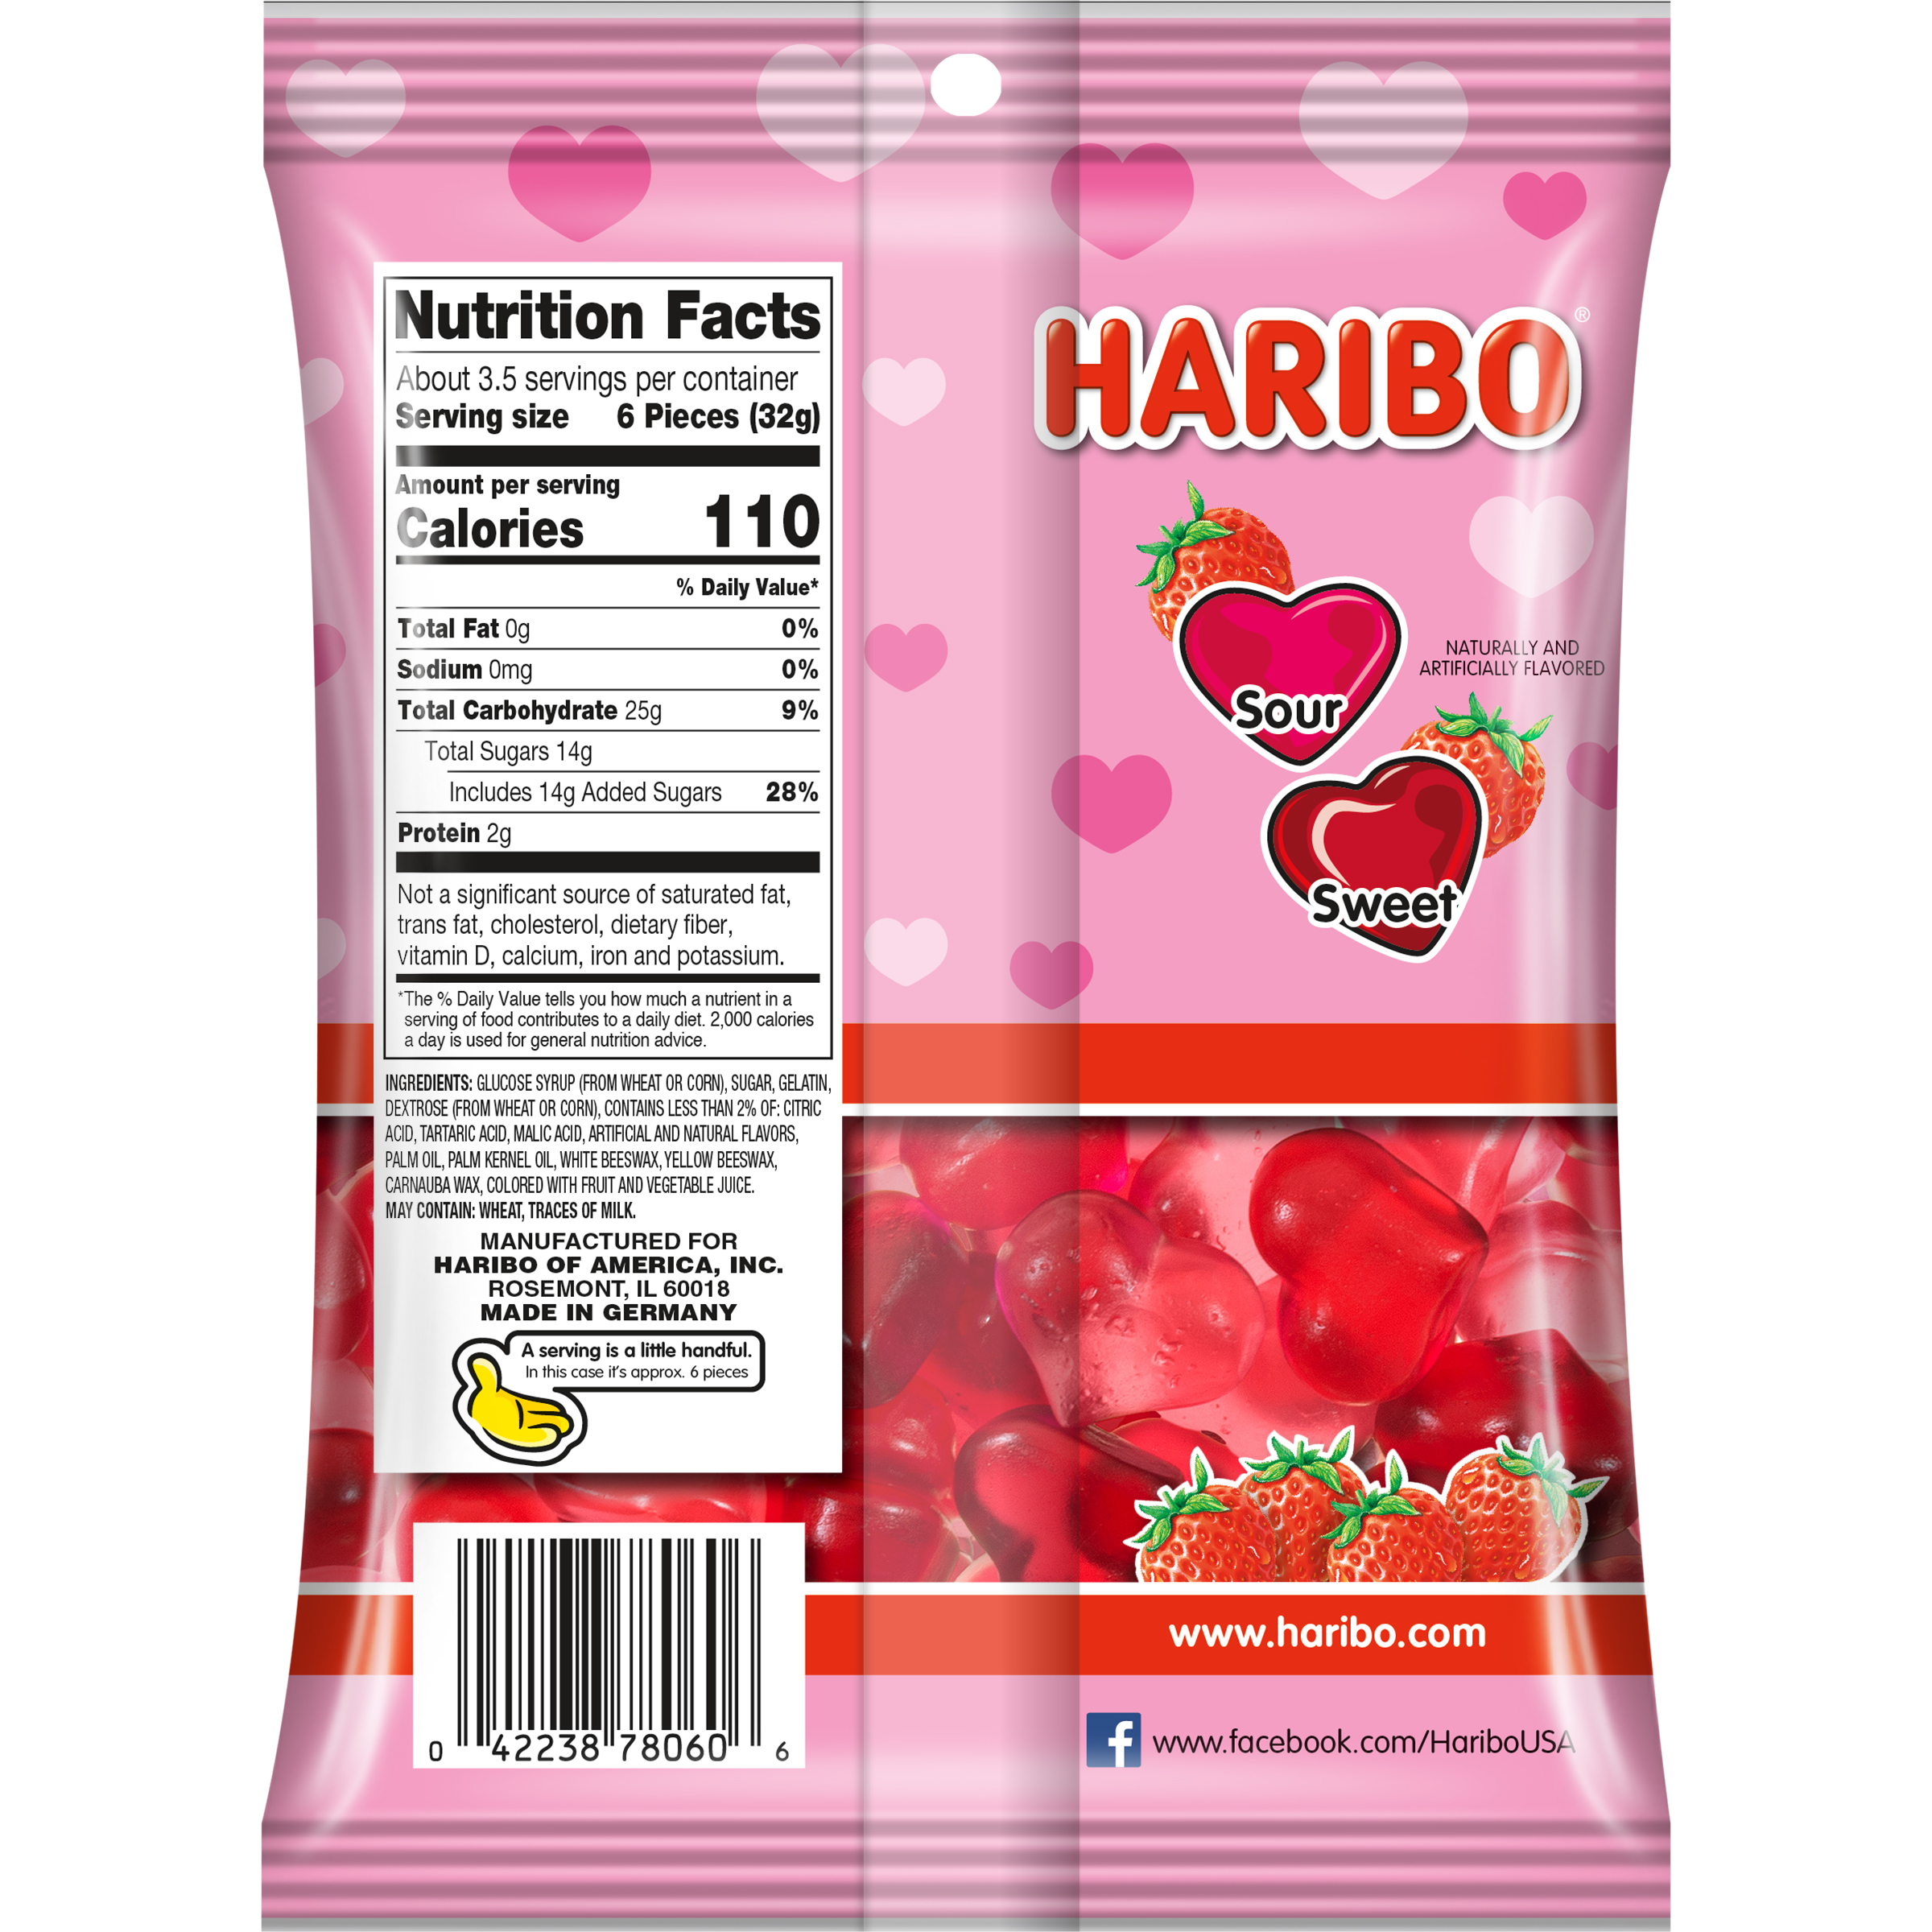 Haribo Valentine's Sweet and Sour Hearts - 4oz - image 3 of 6